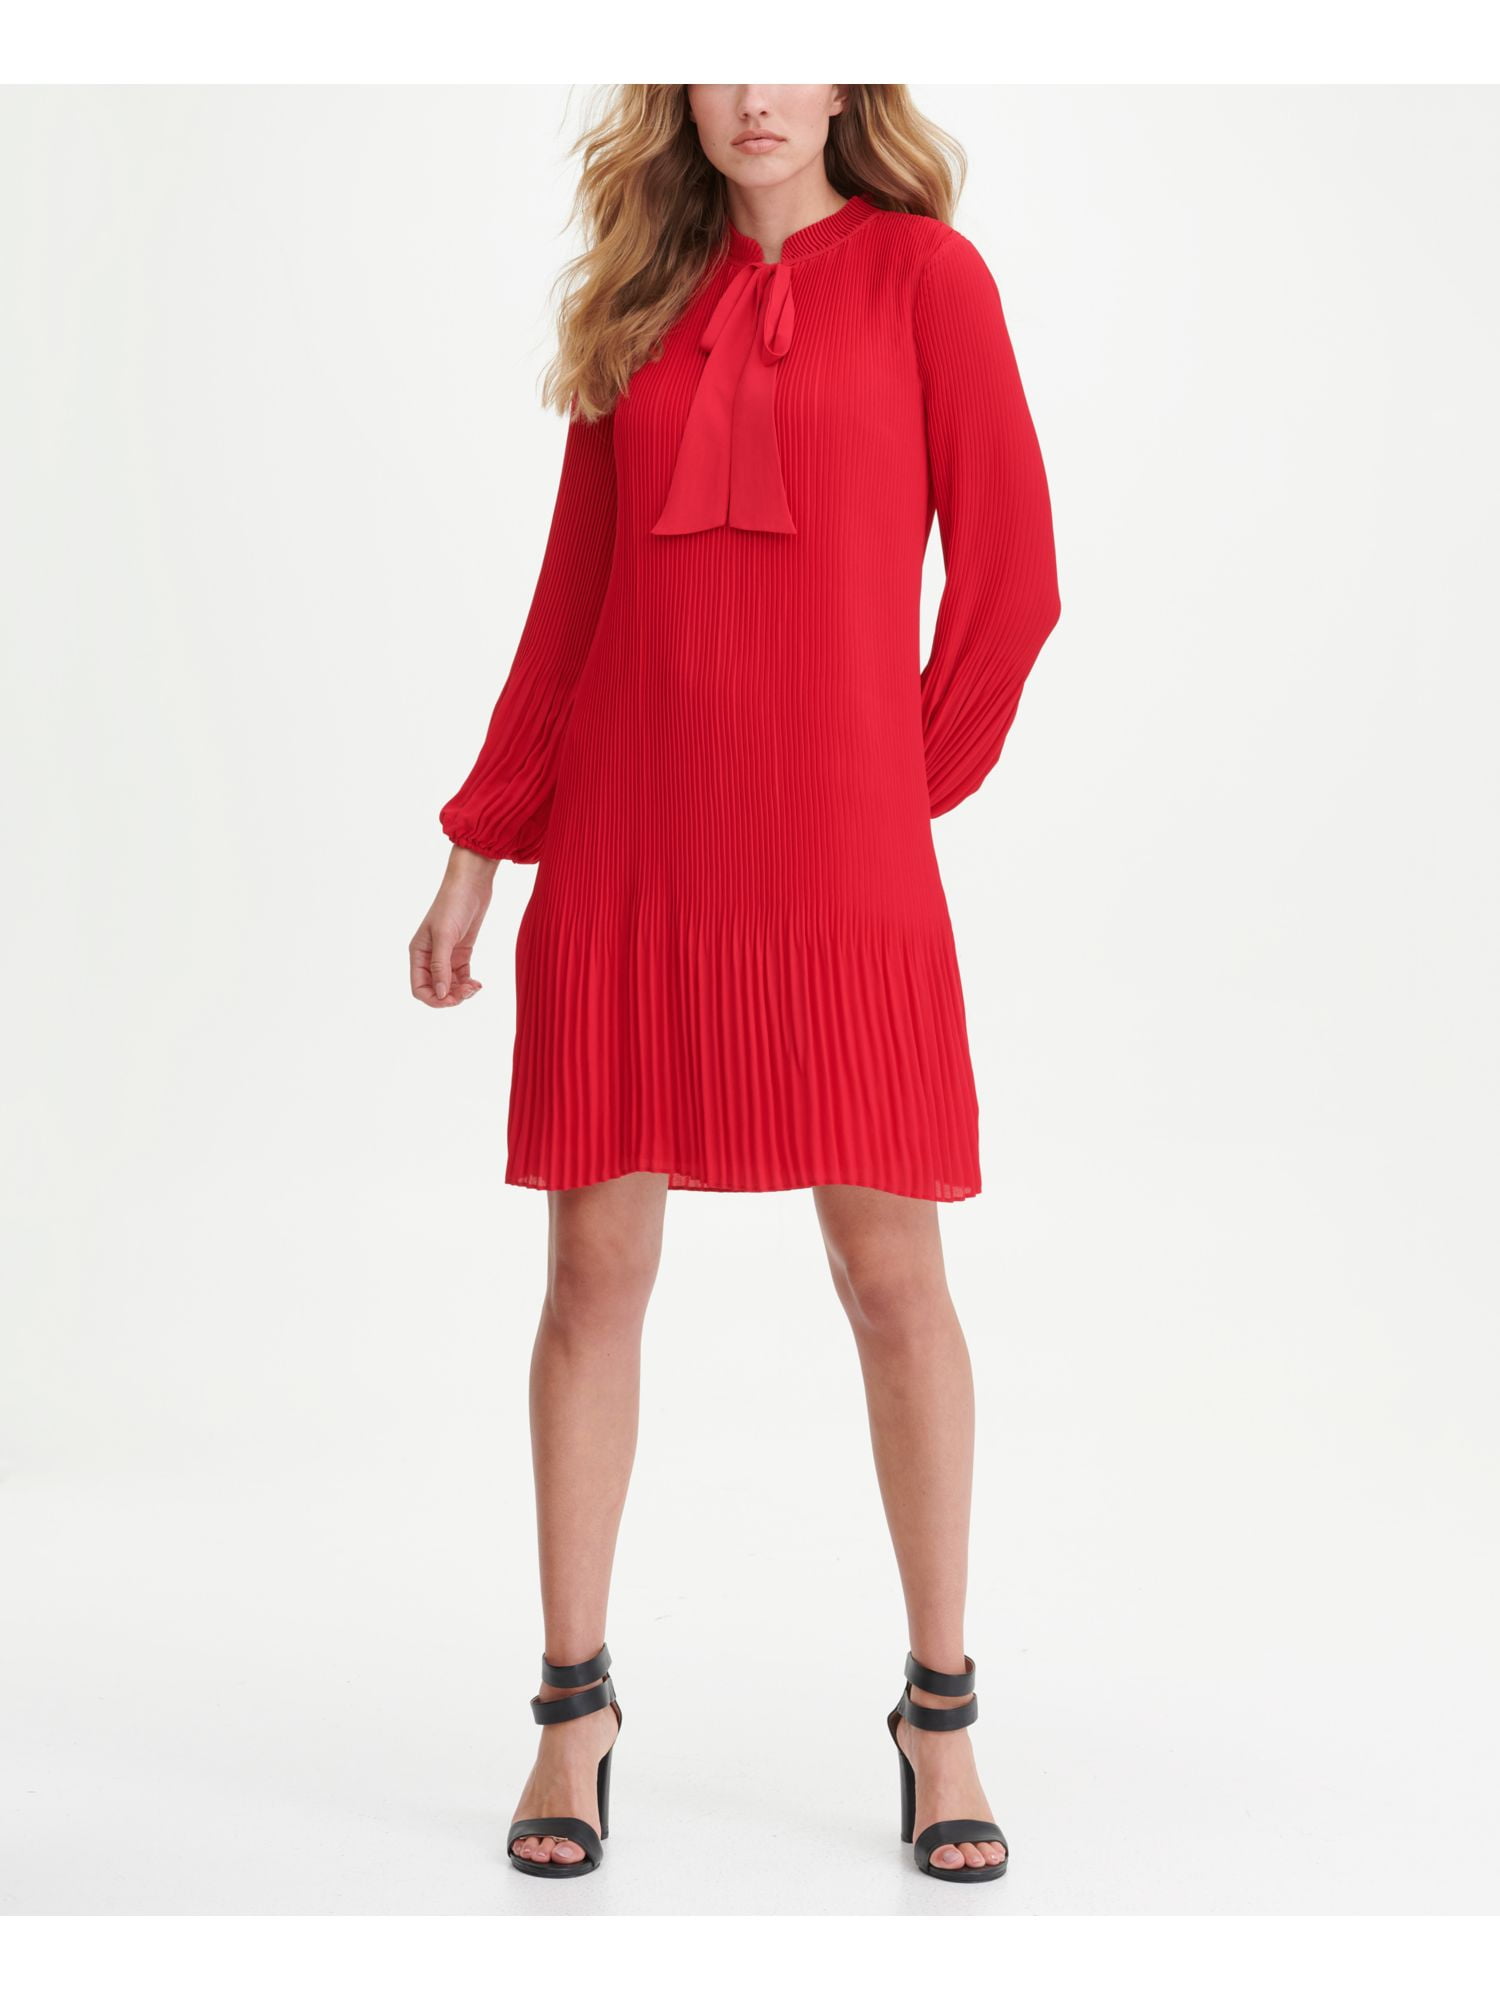 DKNY Womens Red Pleated Long Sleeve Tie Neck Short Evening Fit Flare Dress 2 - Walmart.com